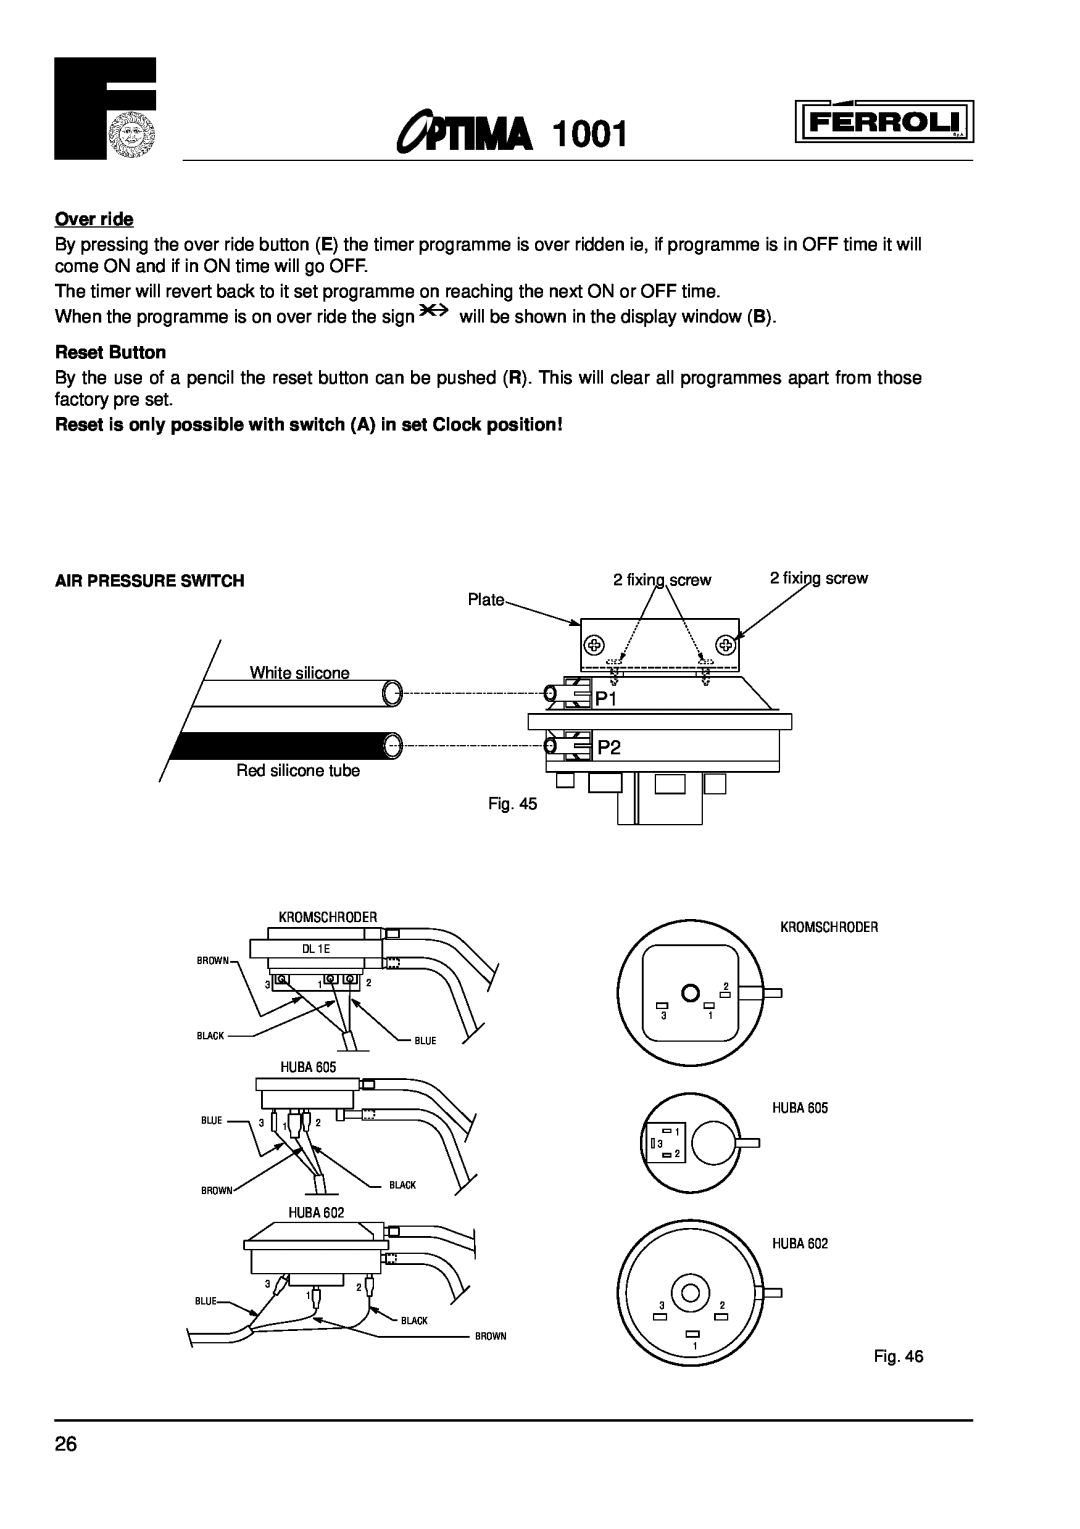 Optima Company 1001 installation instructions P1 P2, Over ride, Reset Button 